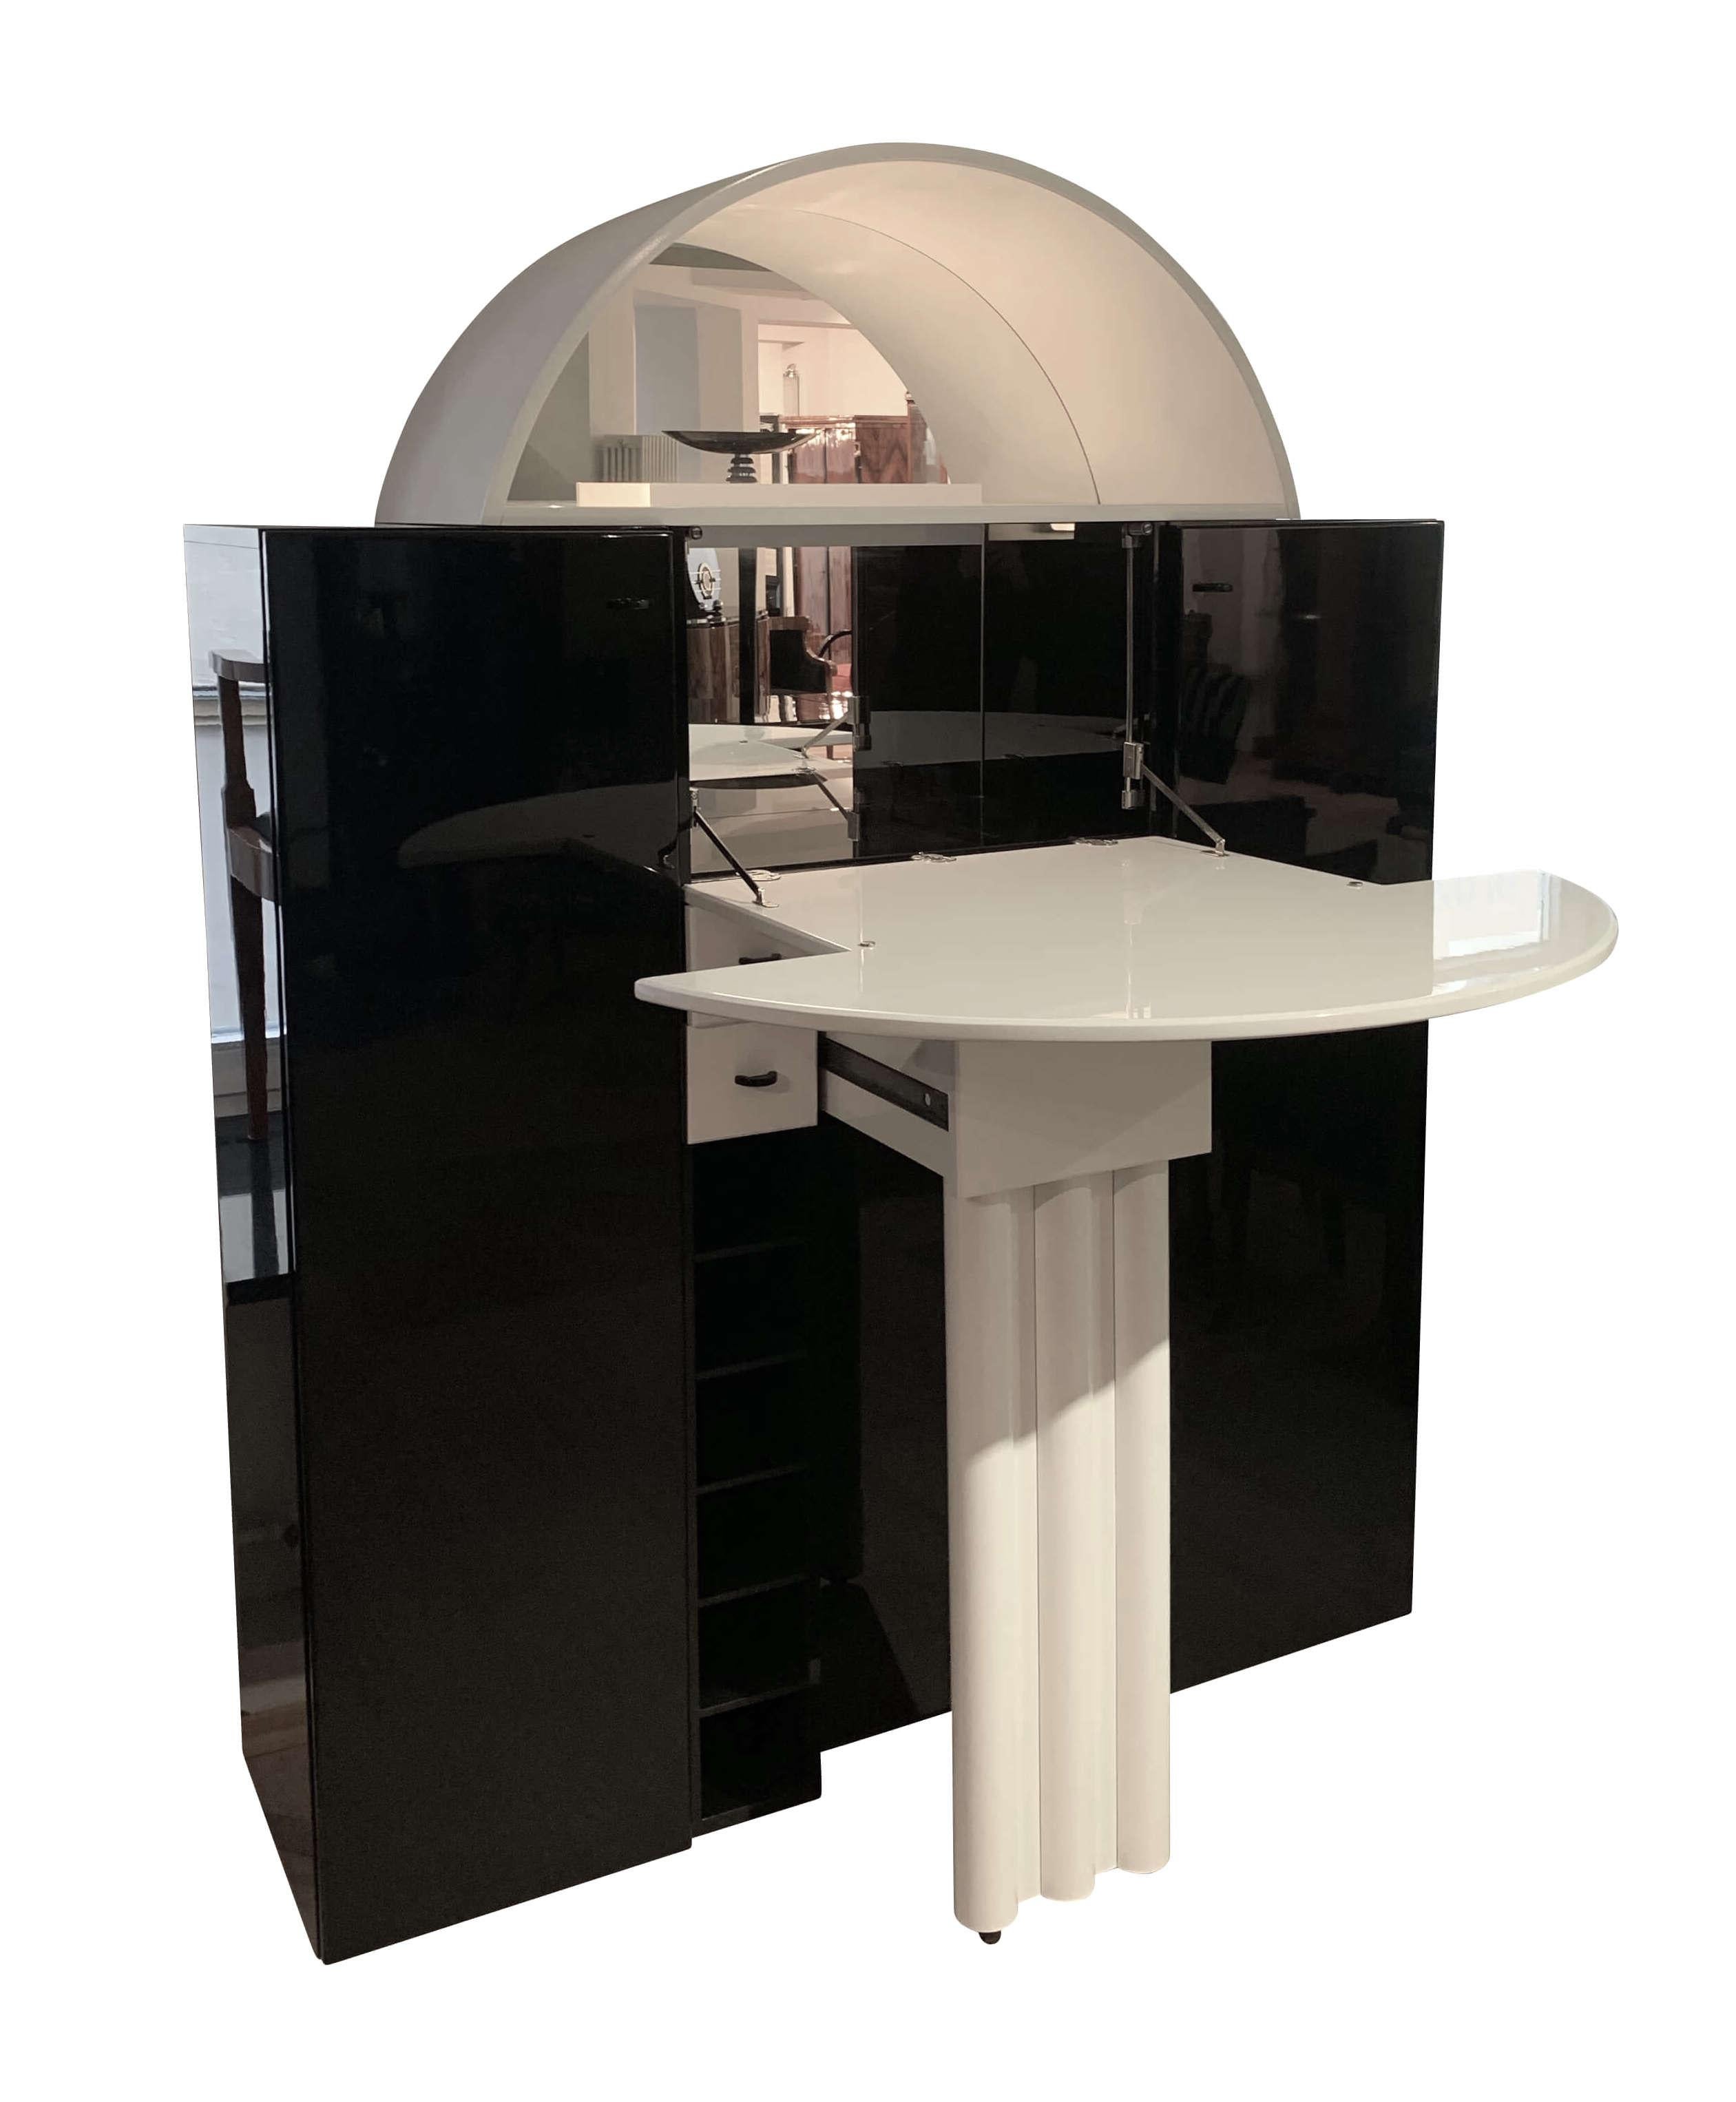 Space Age Interlübke Bar Cabinet with Fold-Down Mechanism, Black and White, Germany, 1970s